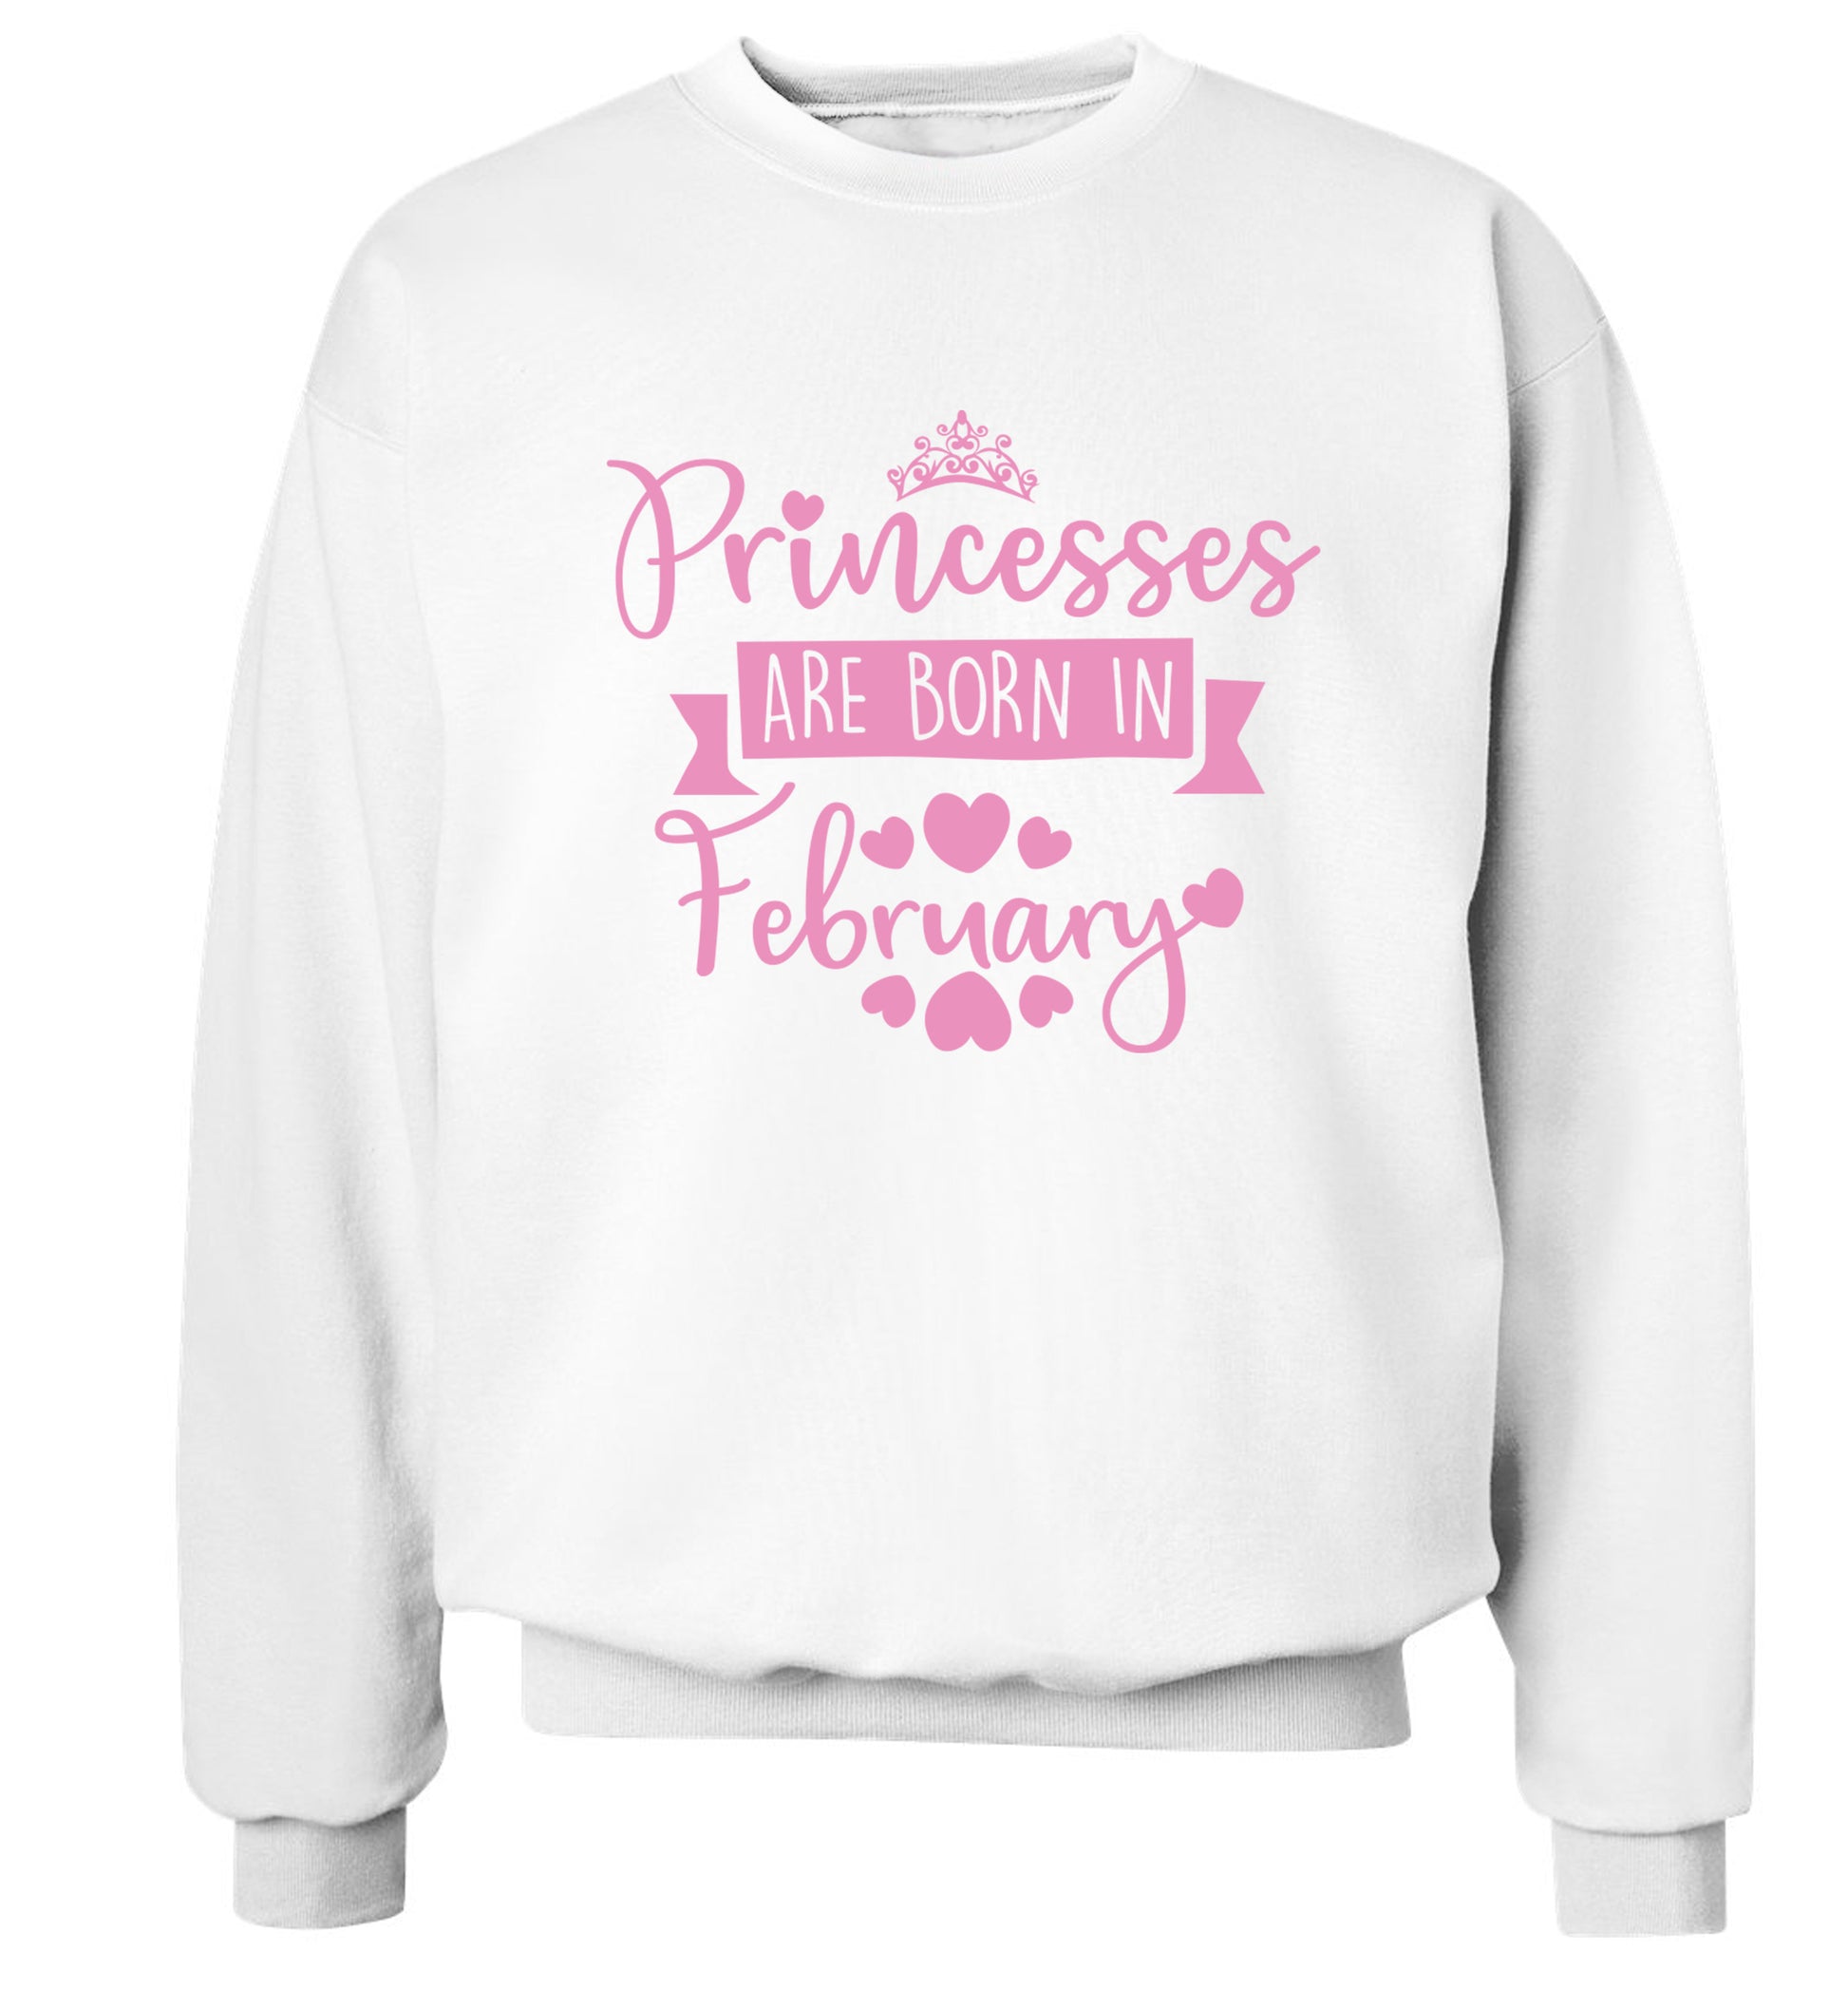 Princesses are born in February Adult's unisex white Sweater 2XL